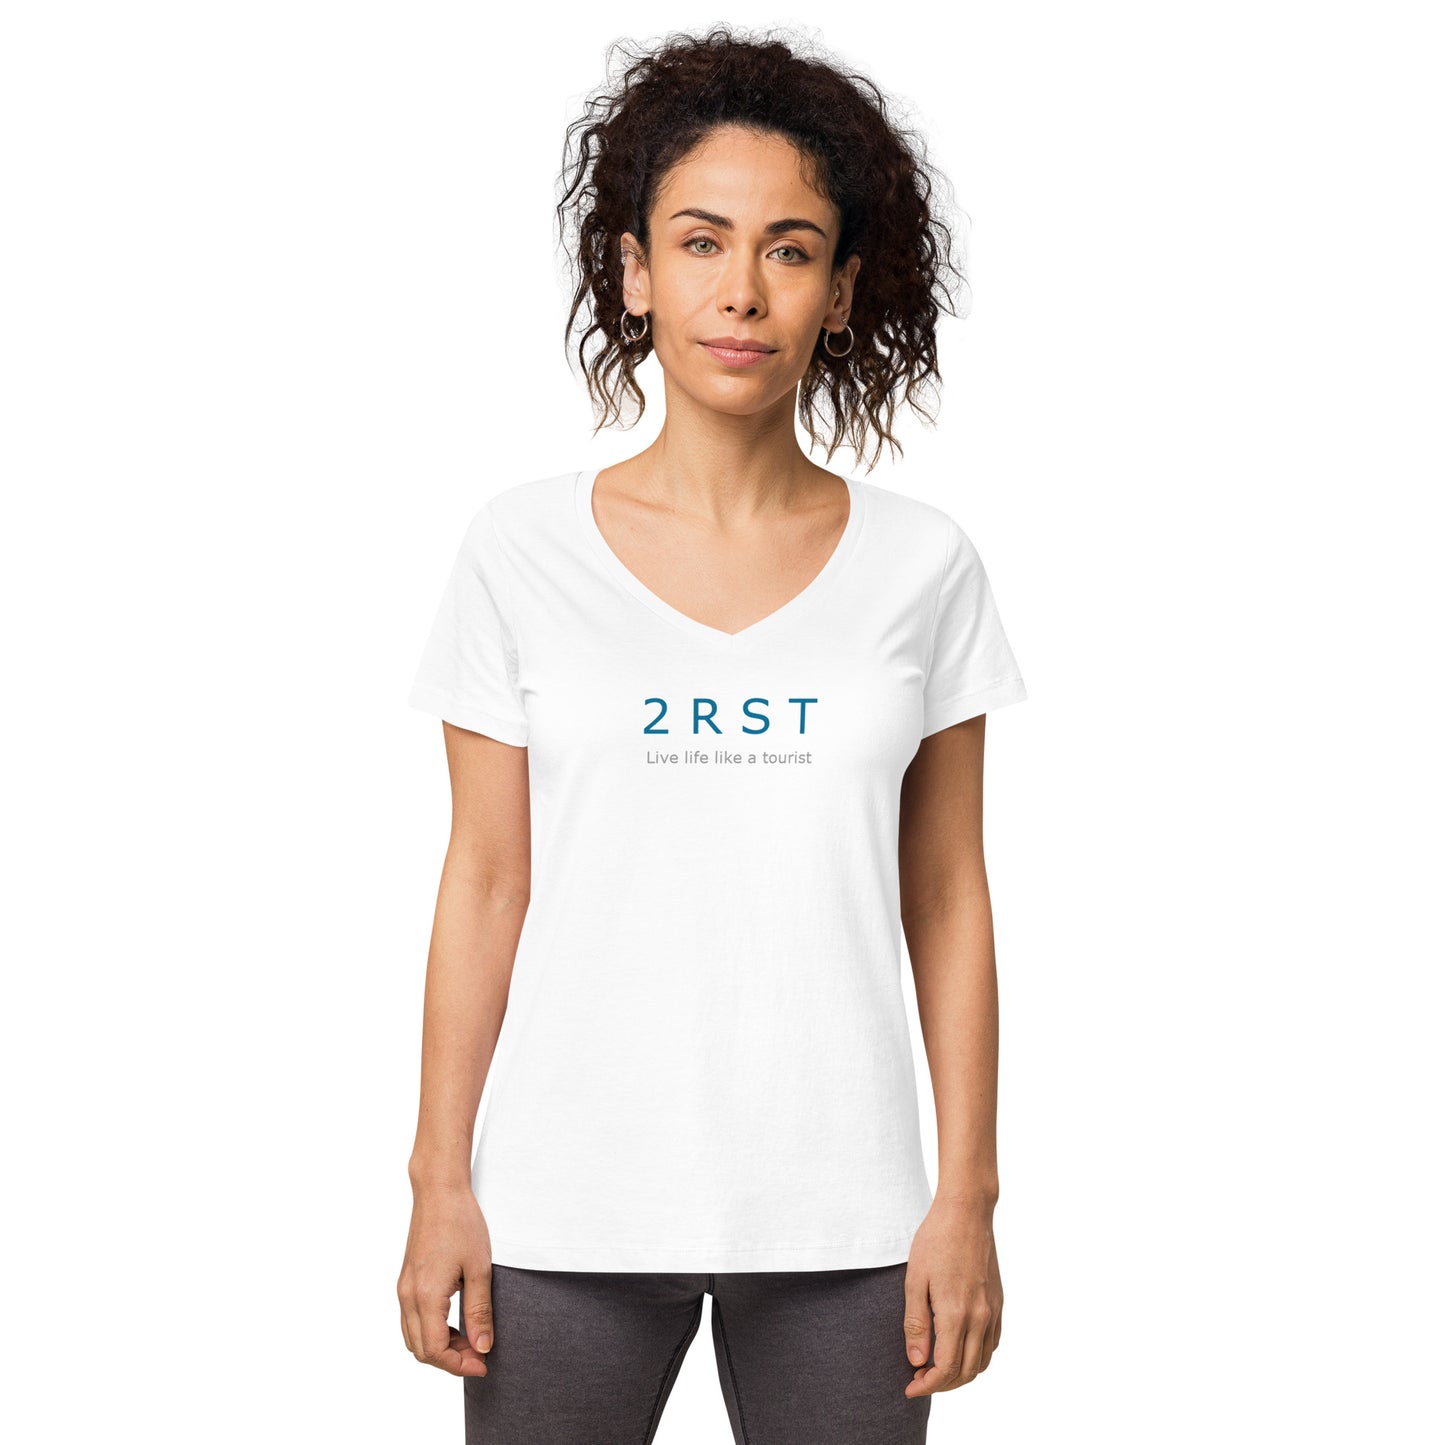 2RST Women’s Fitted V-Neck Tee